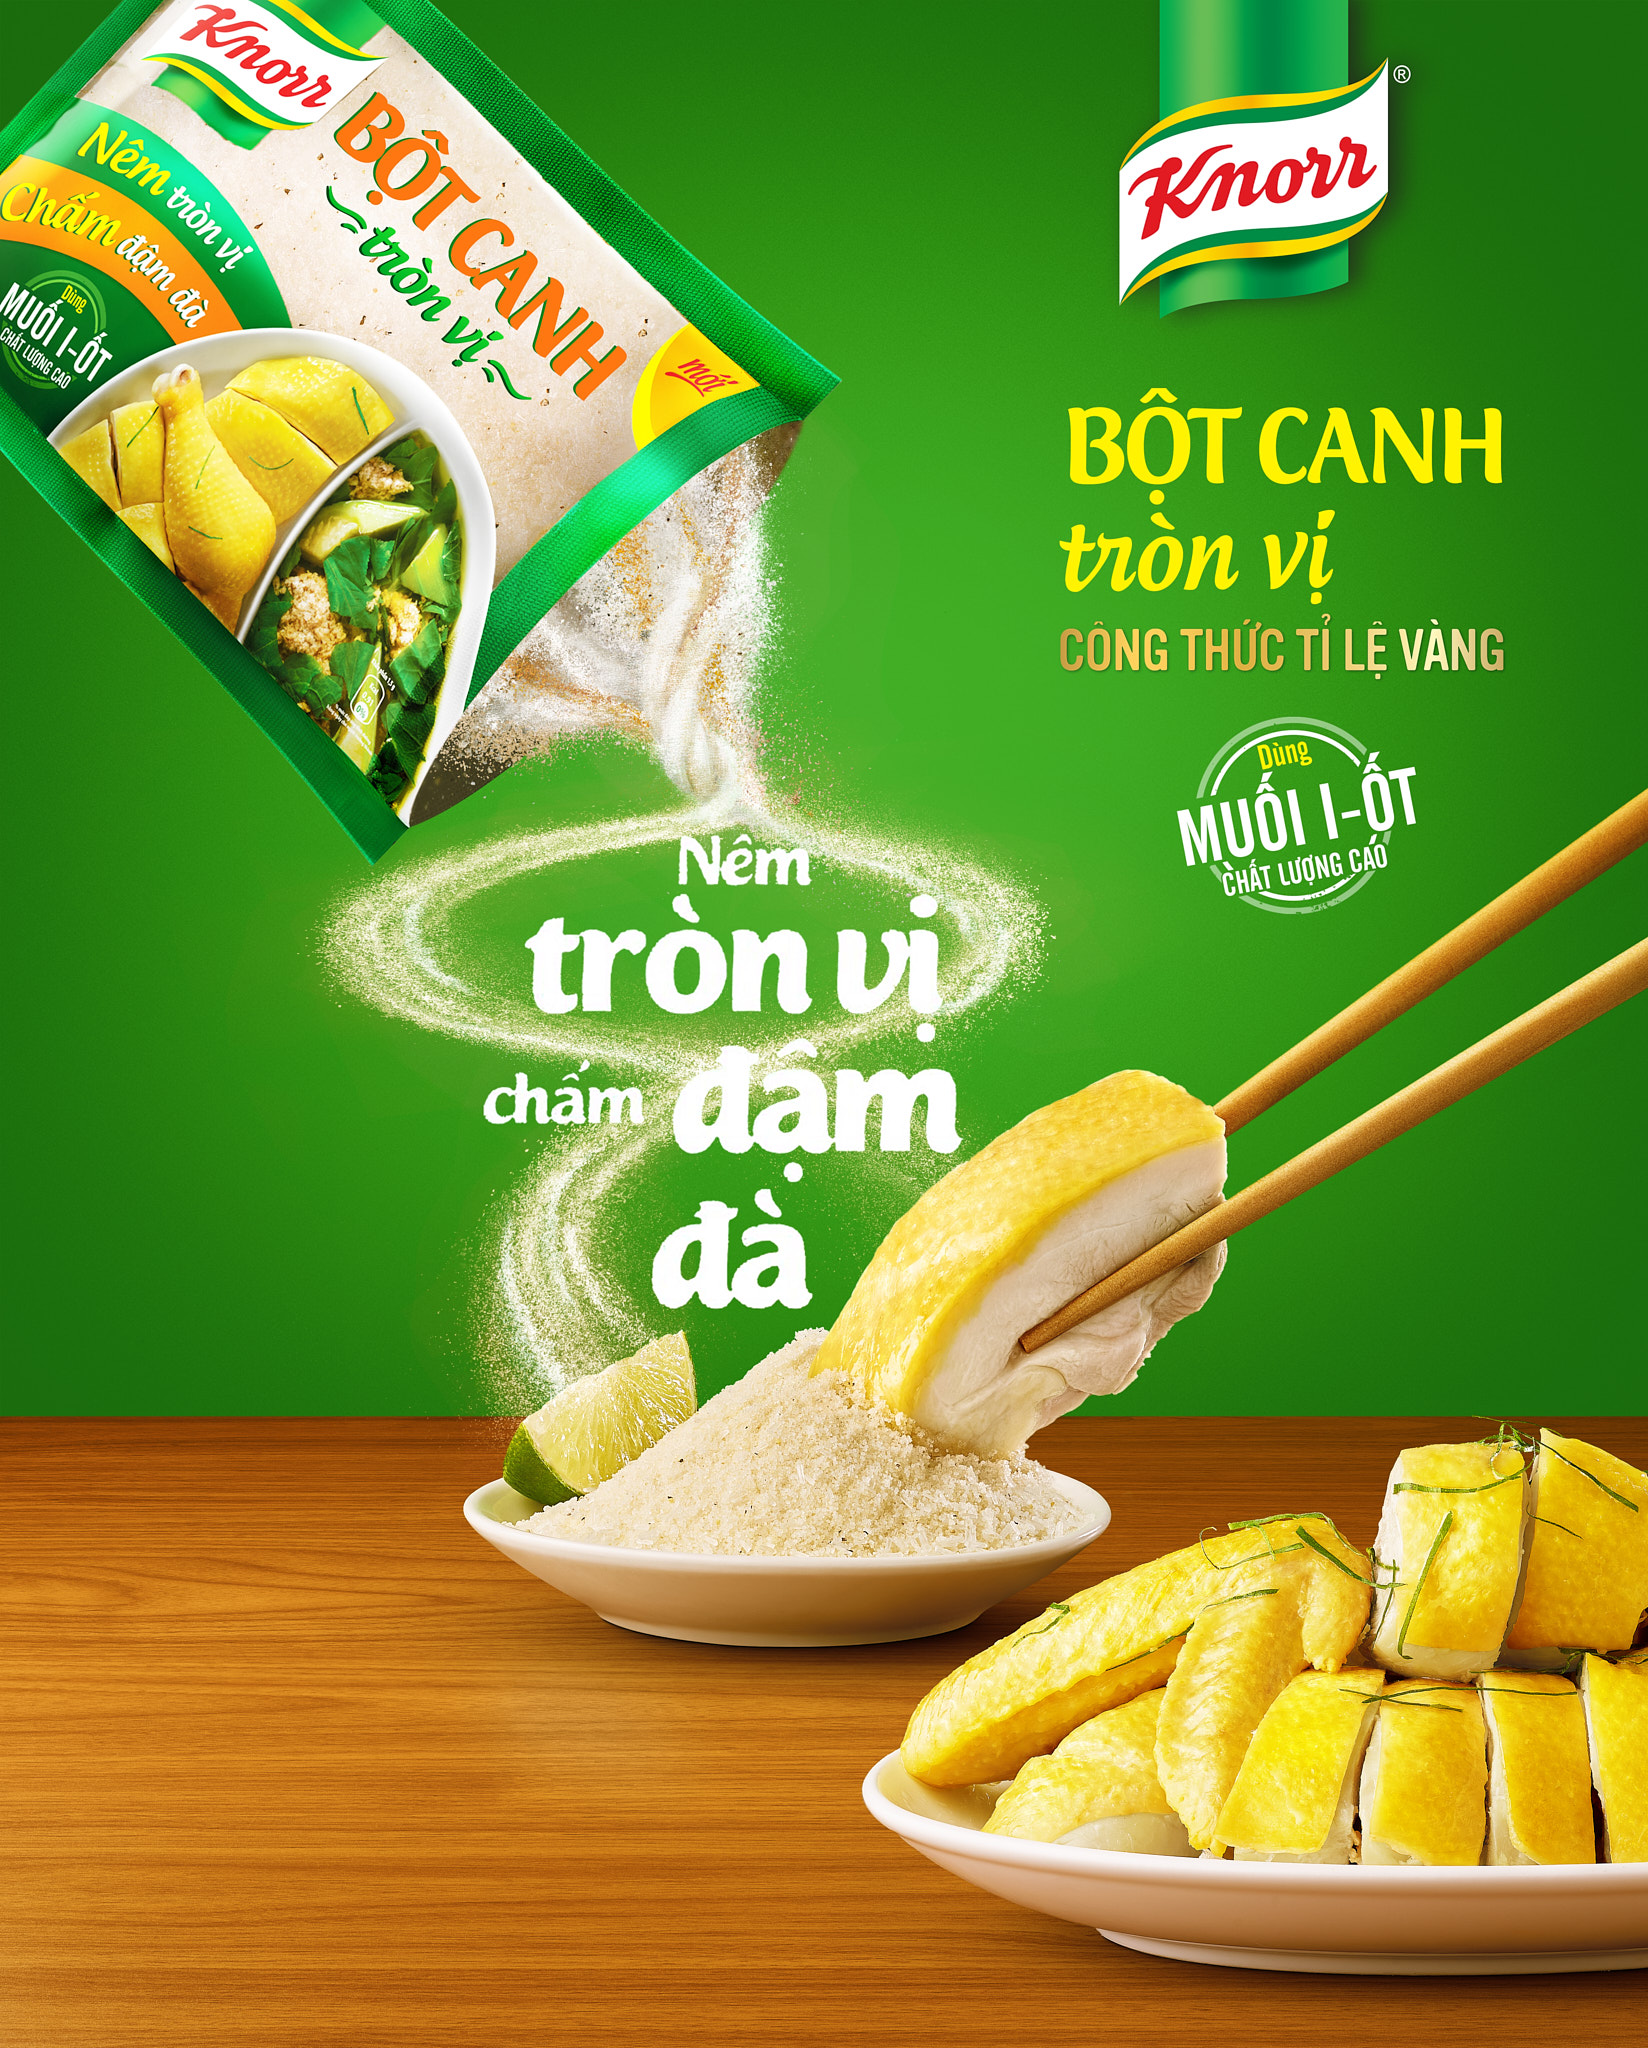 Knorrbotcanh